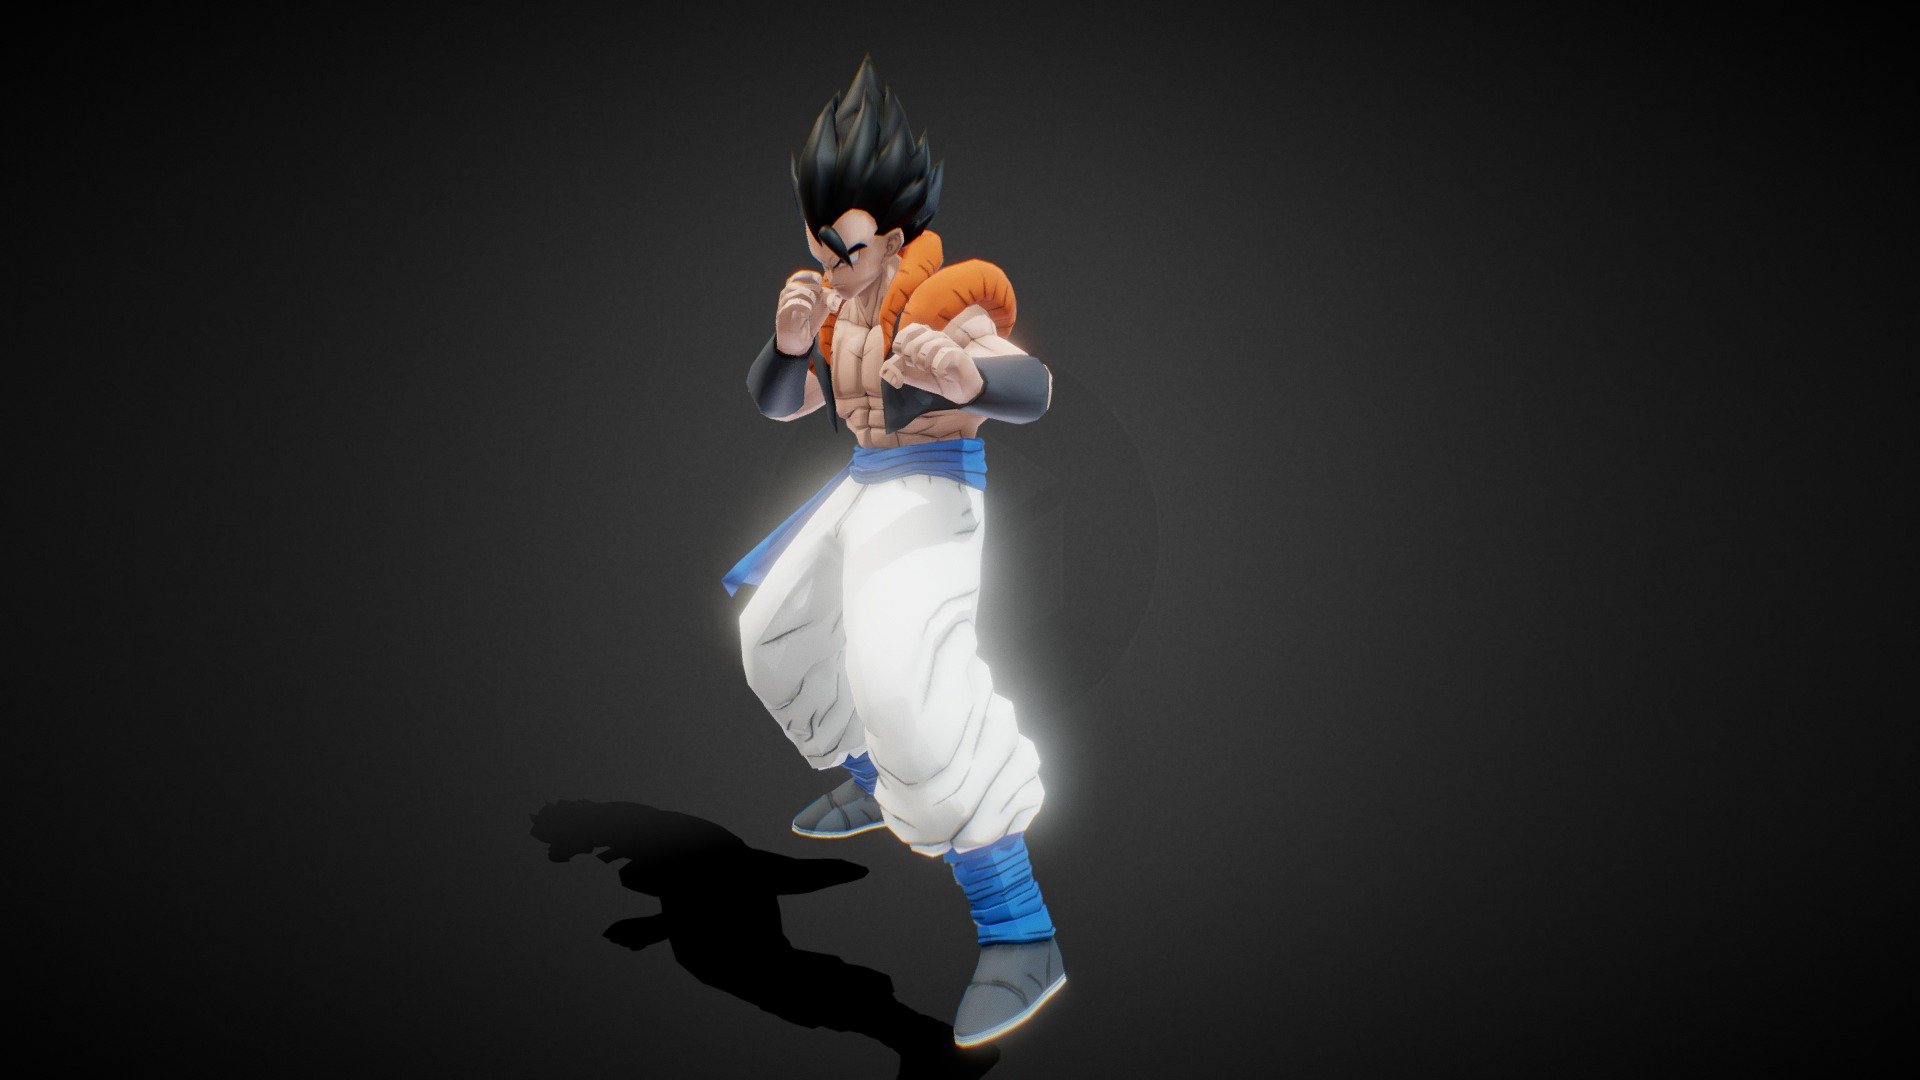 A 3d Gogeta Model Made by Me
Sorry I cannot Share this Project.
I will try to give this Project after its Complete 3d model